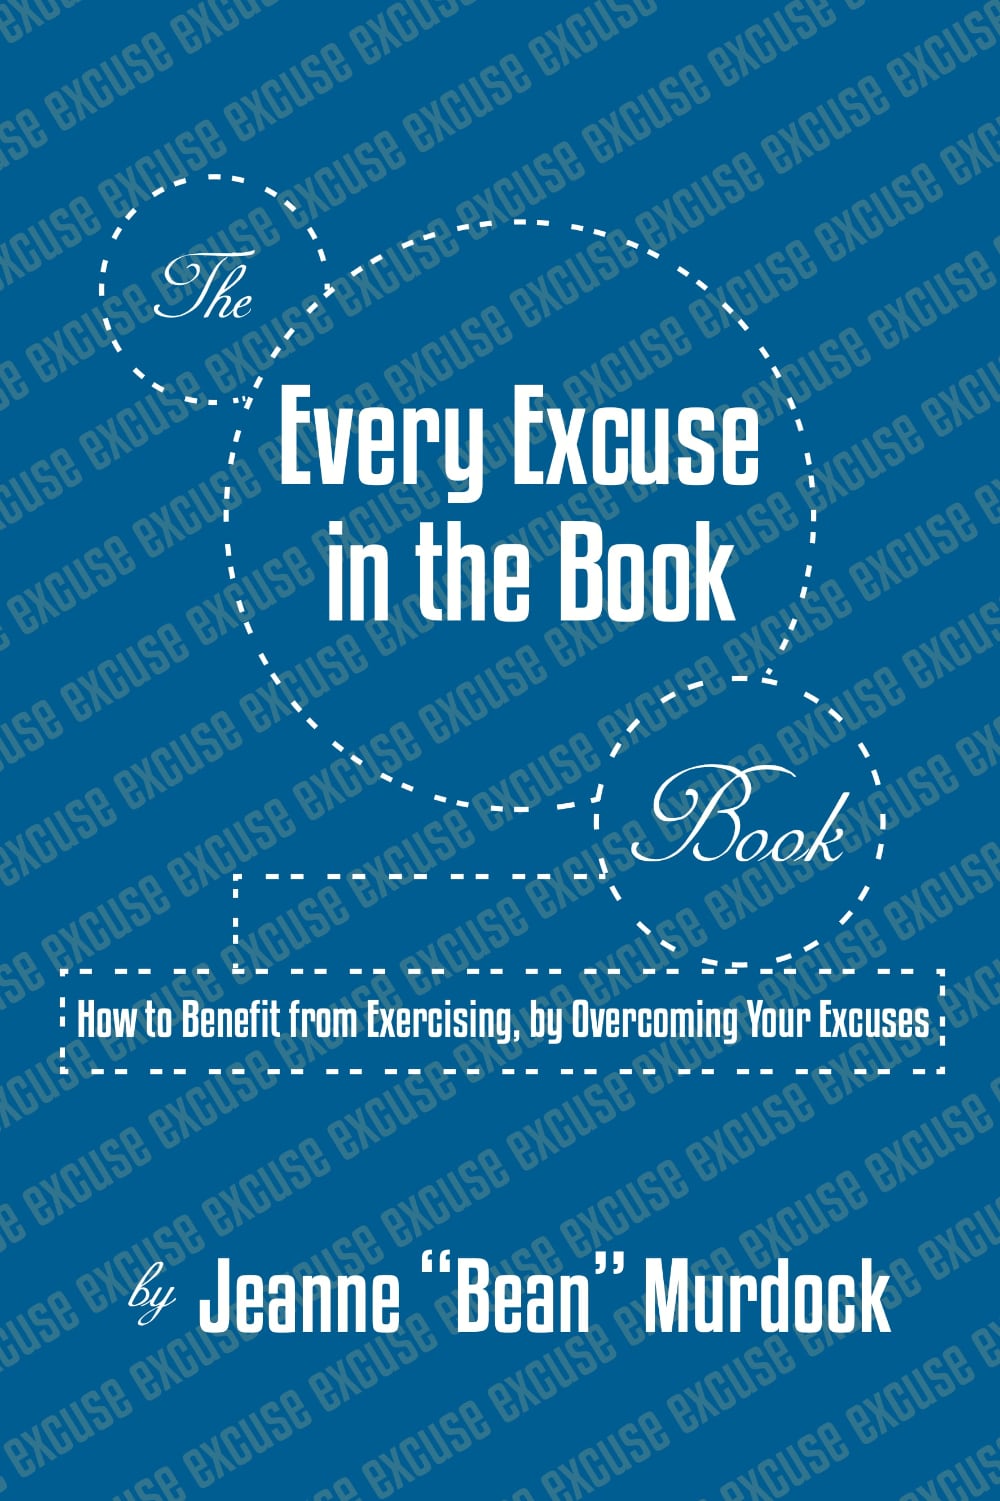 The Every Excuse in the Book Book<br /> How to Benefit from Exercising, by Overcoming Your Excuses